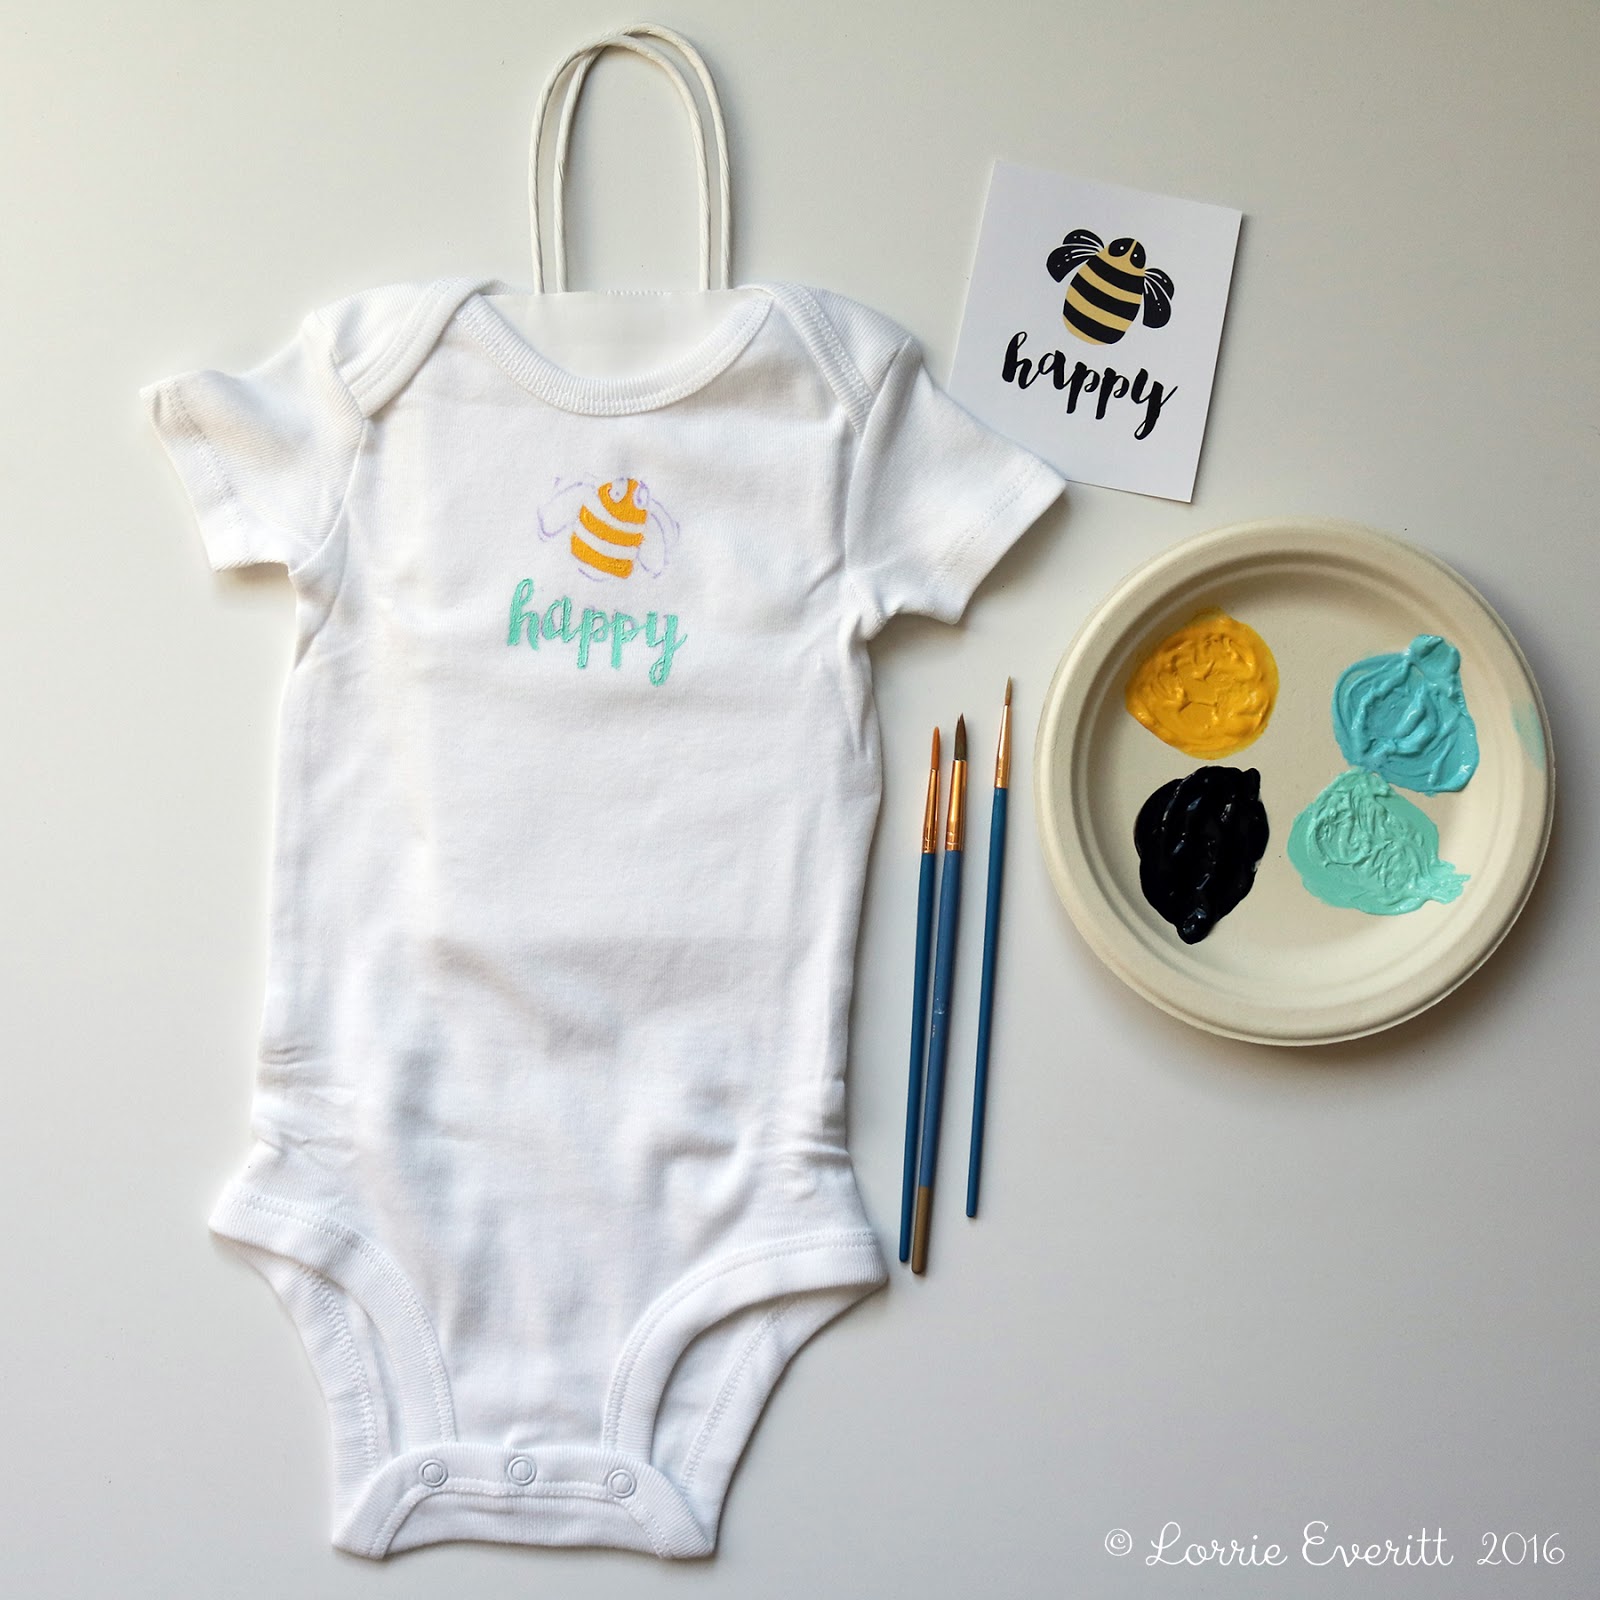 Lorrie Everitt Studio Let's paint some onesies! A baby shower party DIY.